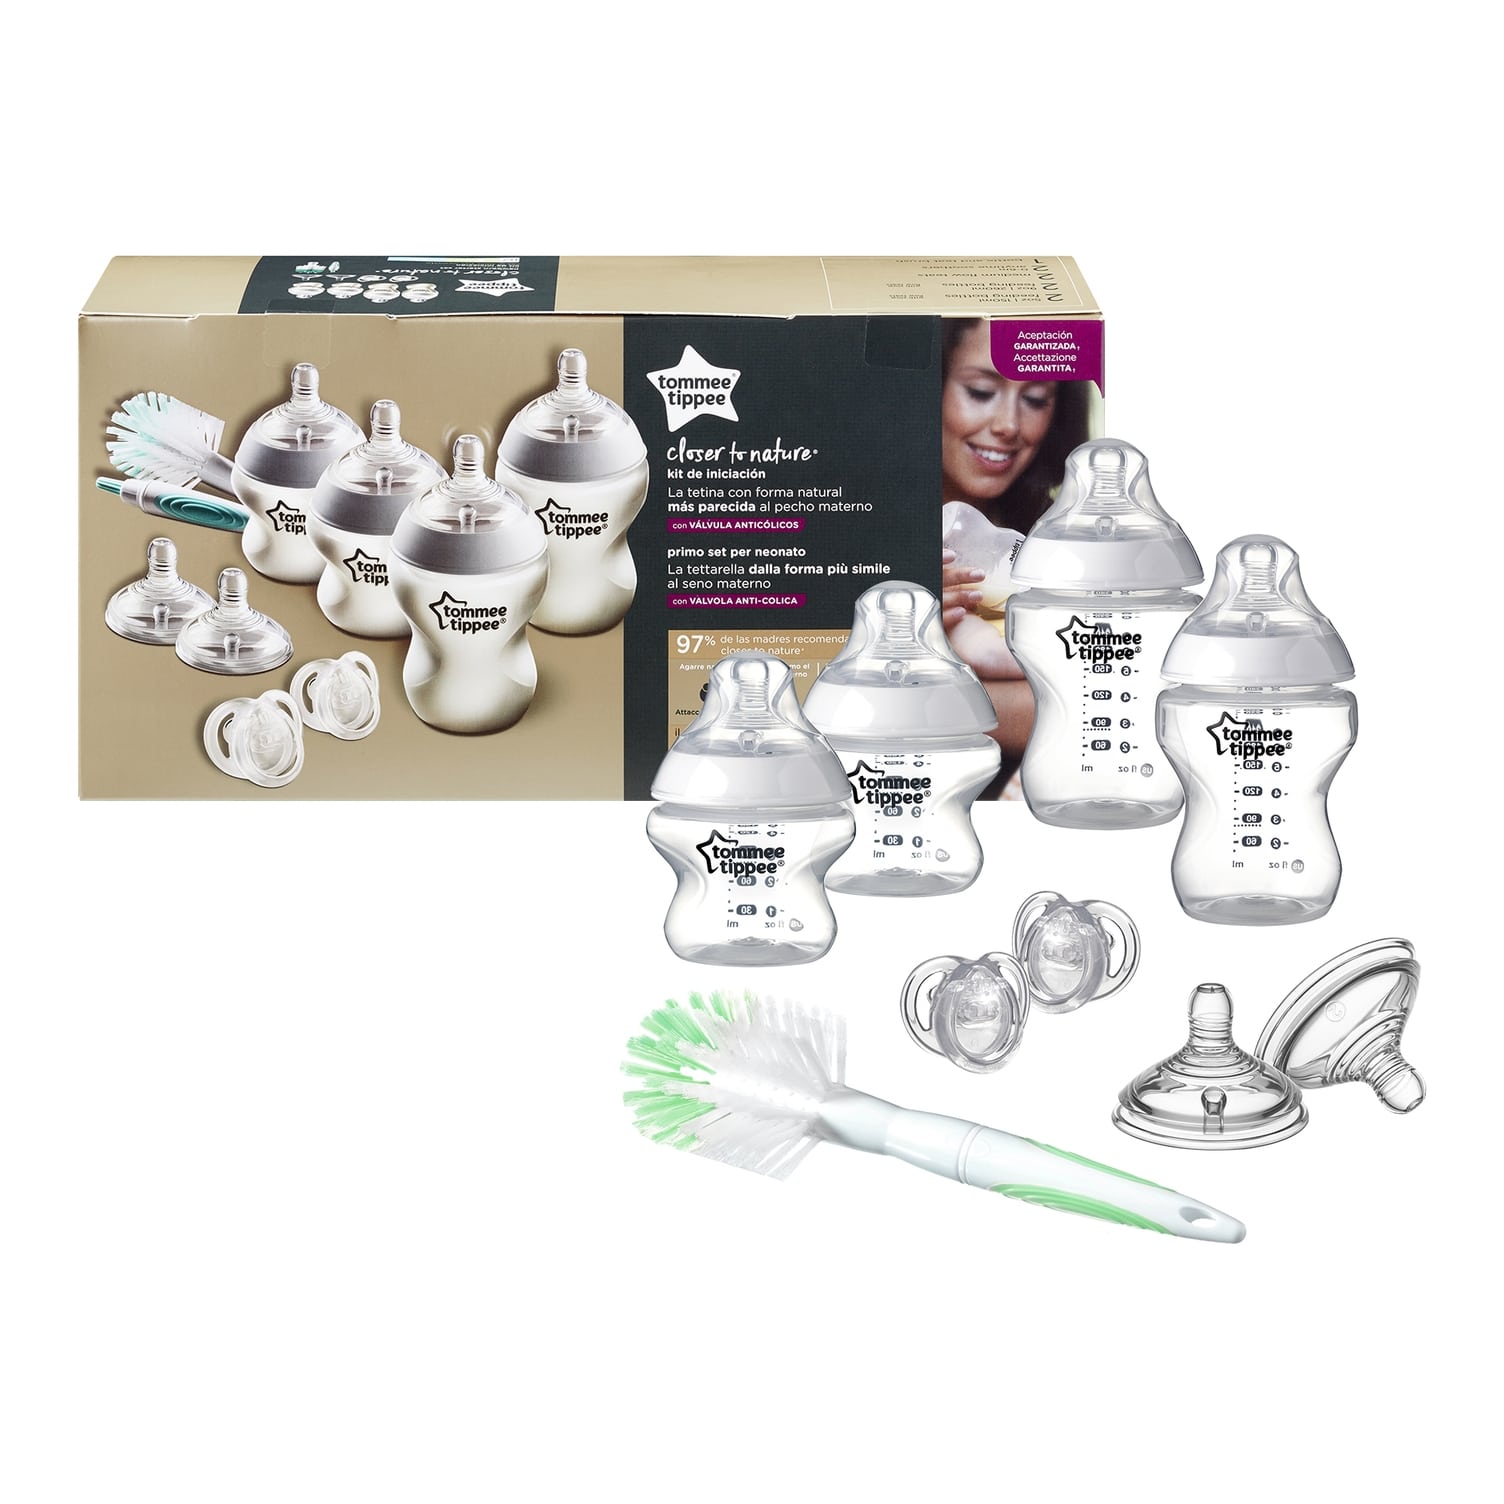 Kit naissance biberons verre closer to nature transparent Tommee Tippee